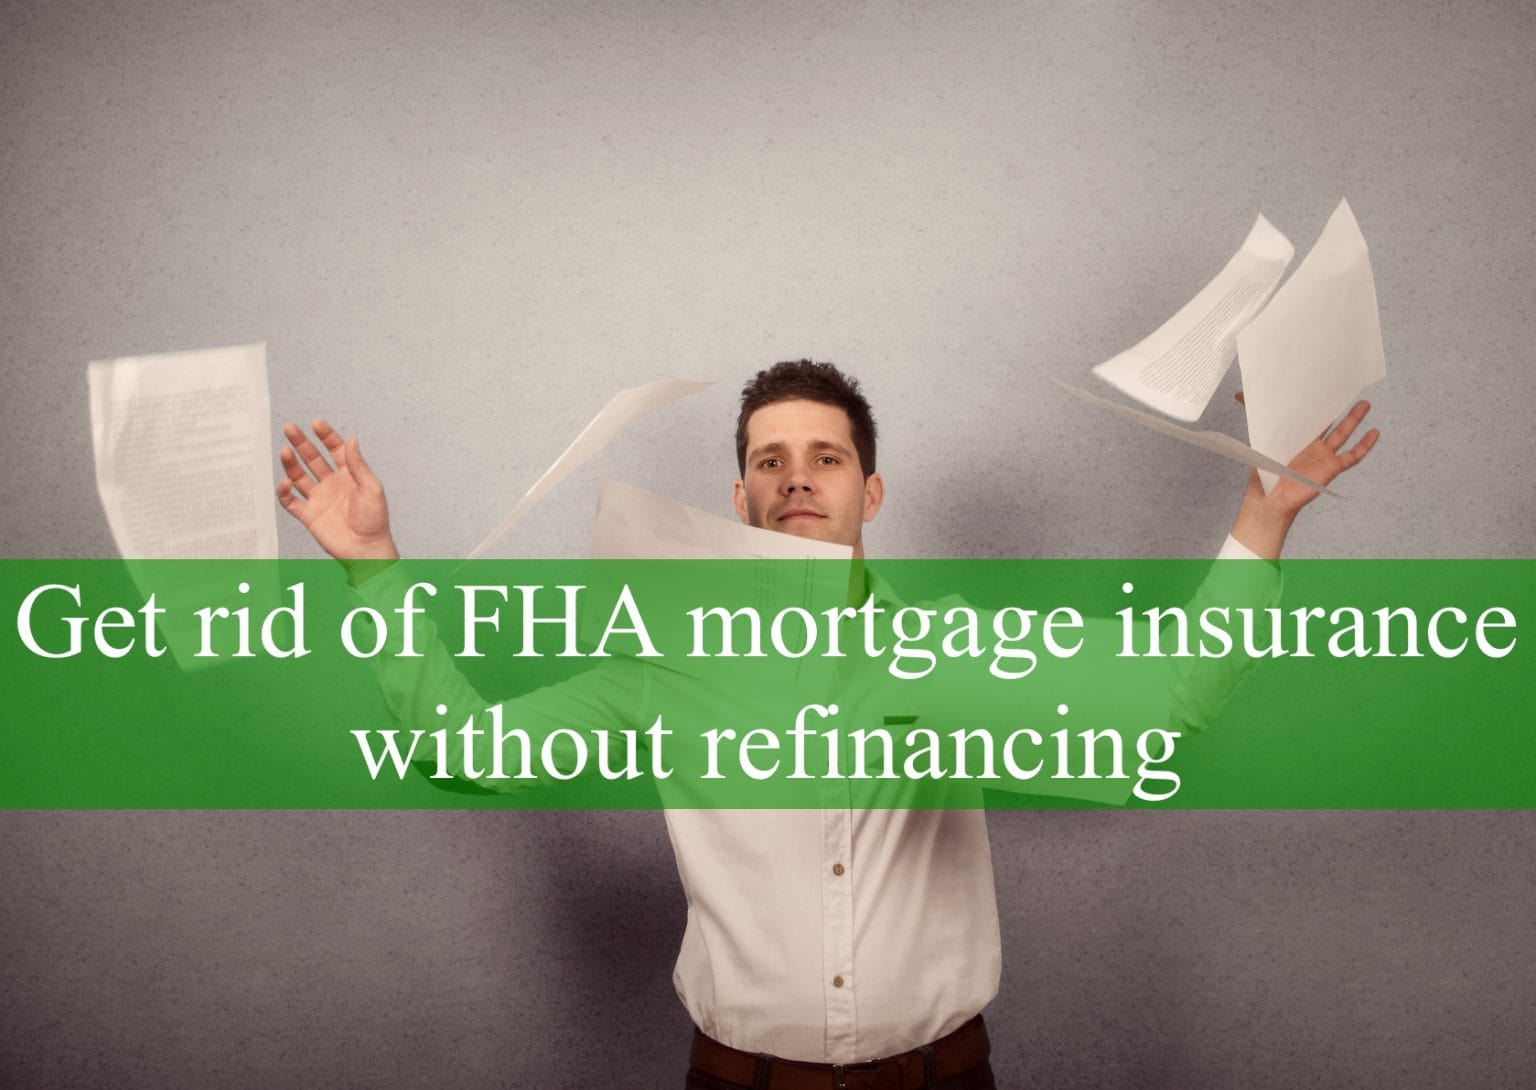 Get Rid of FHA Mortgage Insurance Without Refinancing